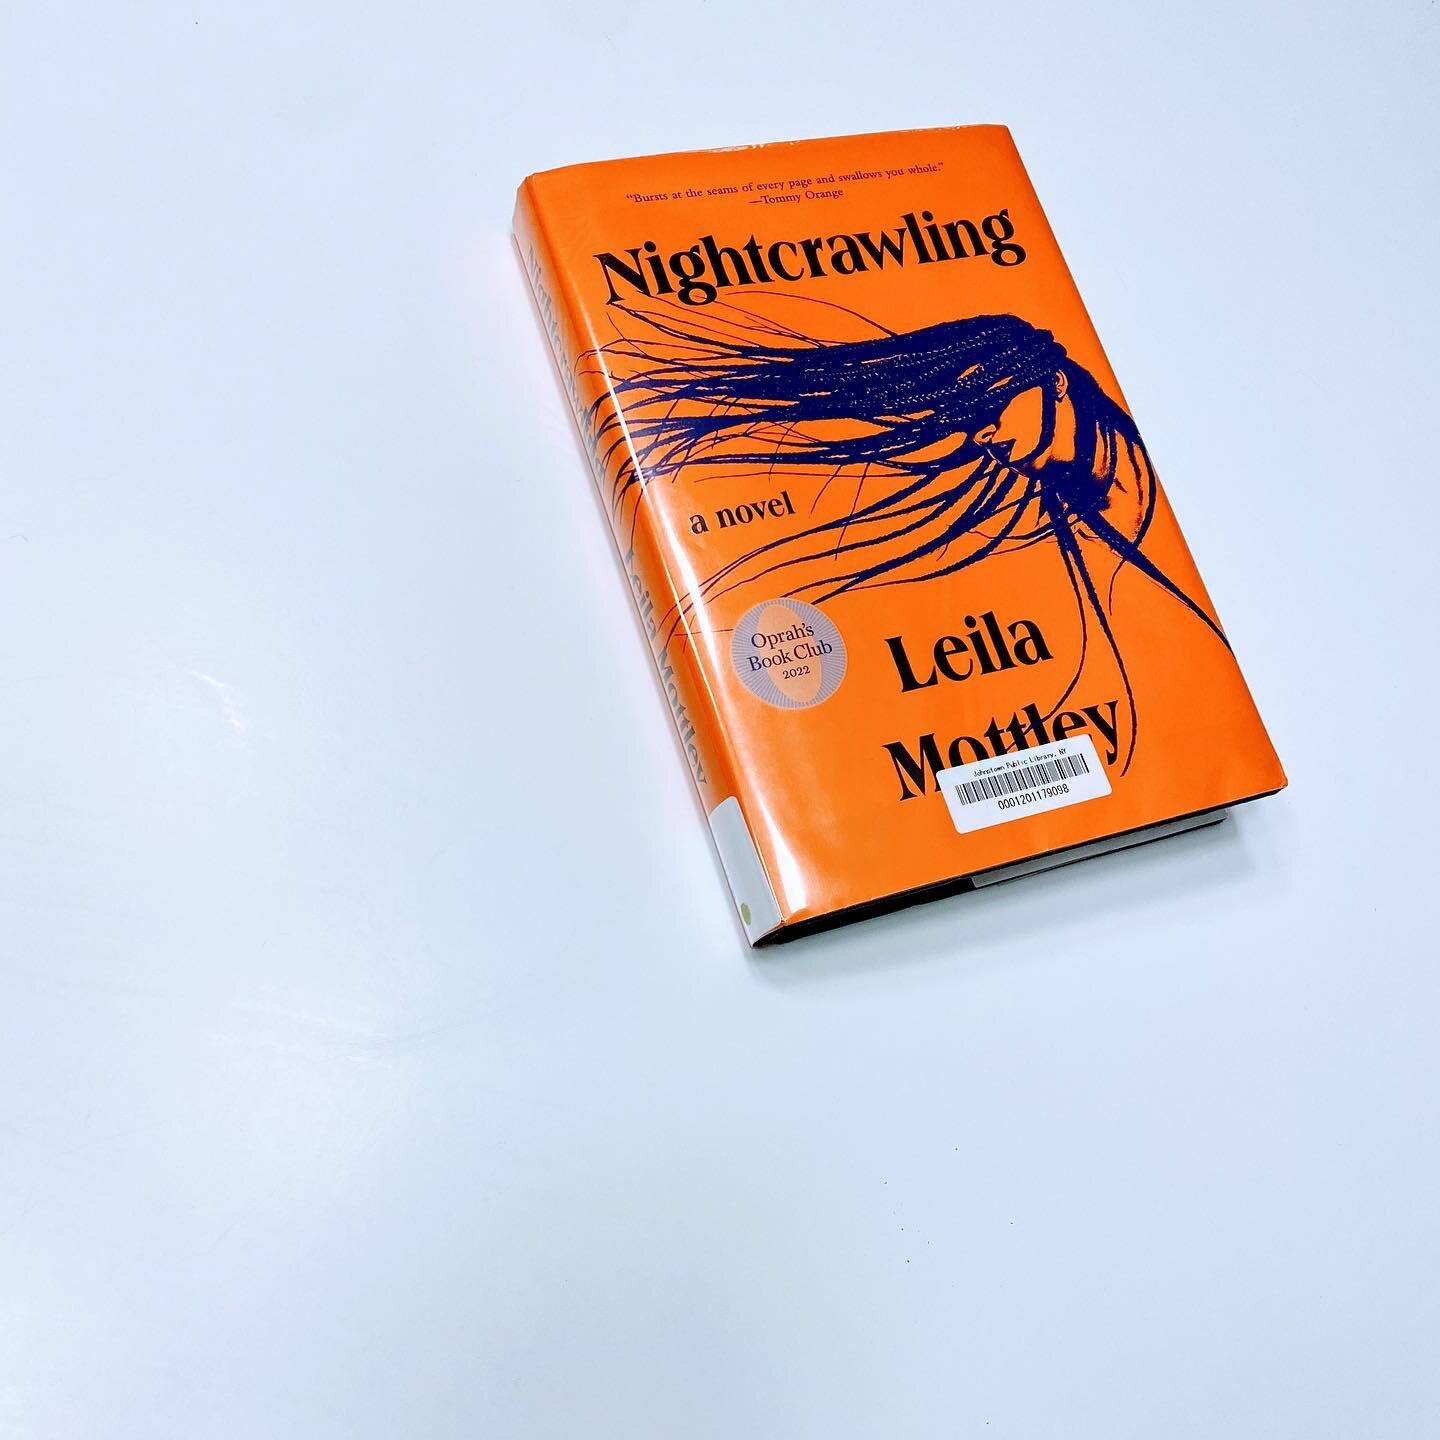 Recommended: Nightcrawling by Leila Mottley. It&rsquo;ll break your heart and put it back together. 

I missed the book club, but glad I got around to it eventually!